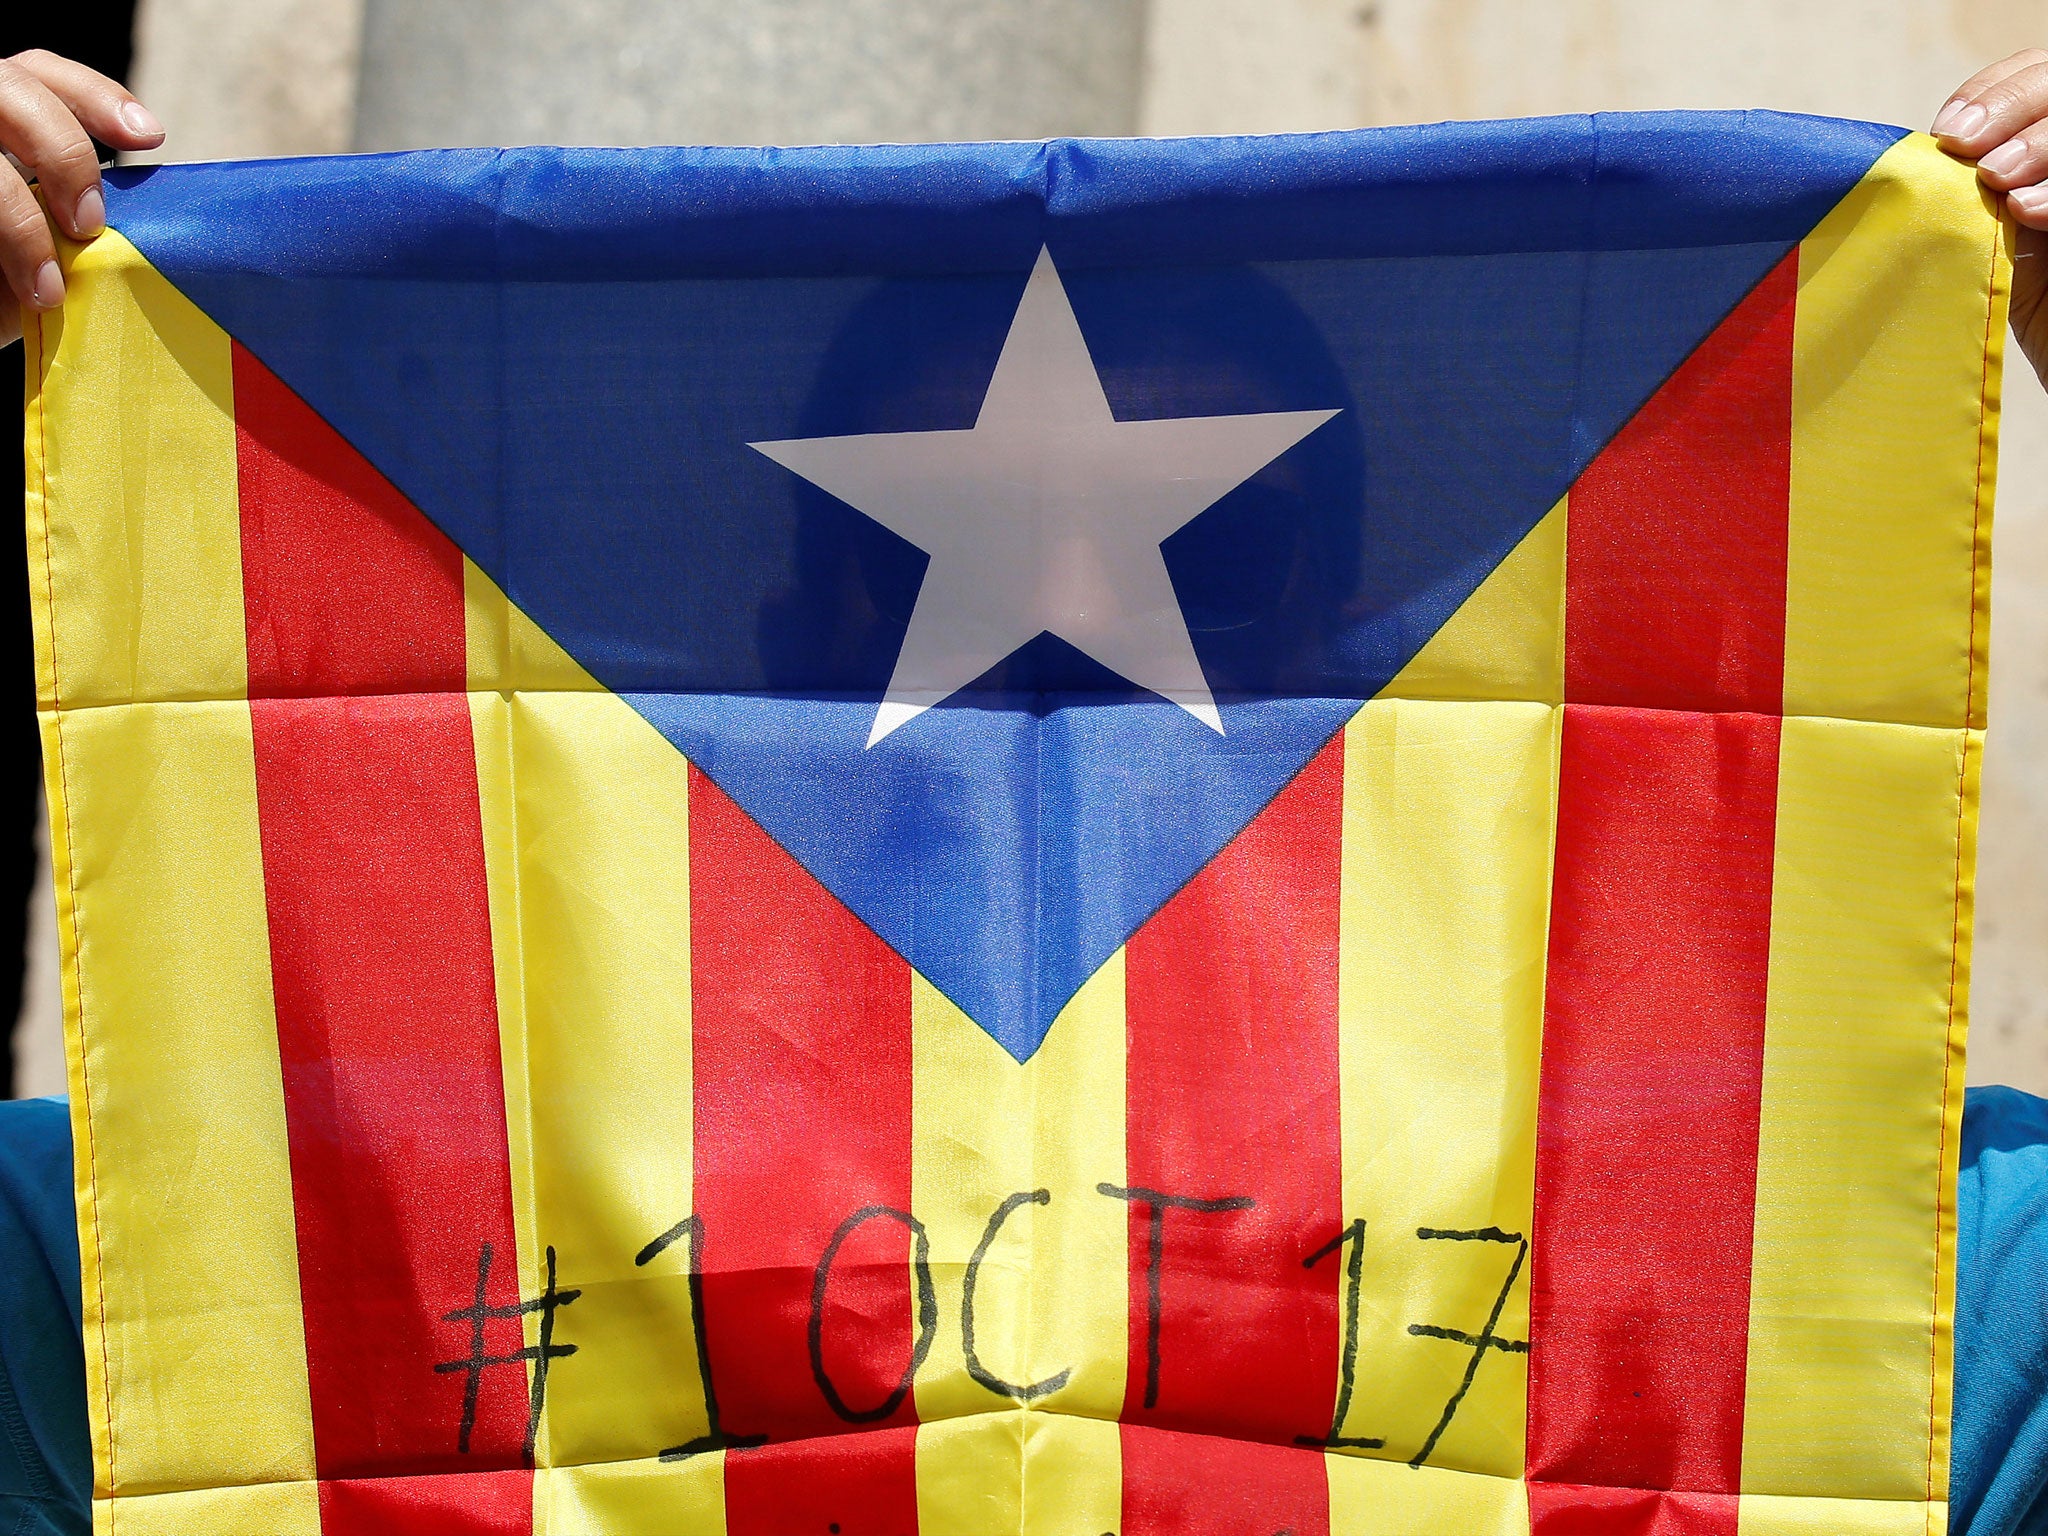 Four out of five Catalan voters taking part in a similar referendum in 2014 backed independence